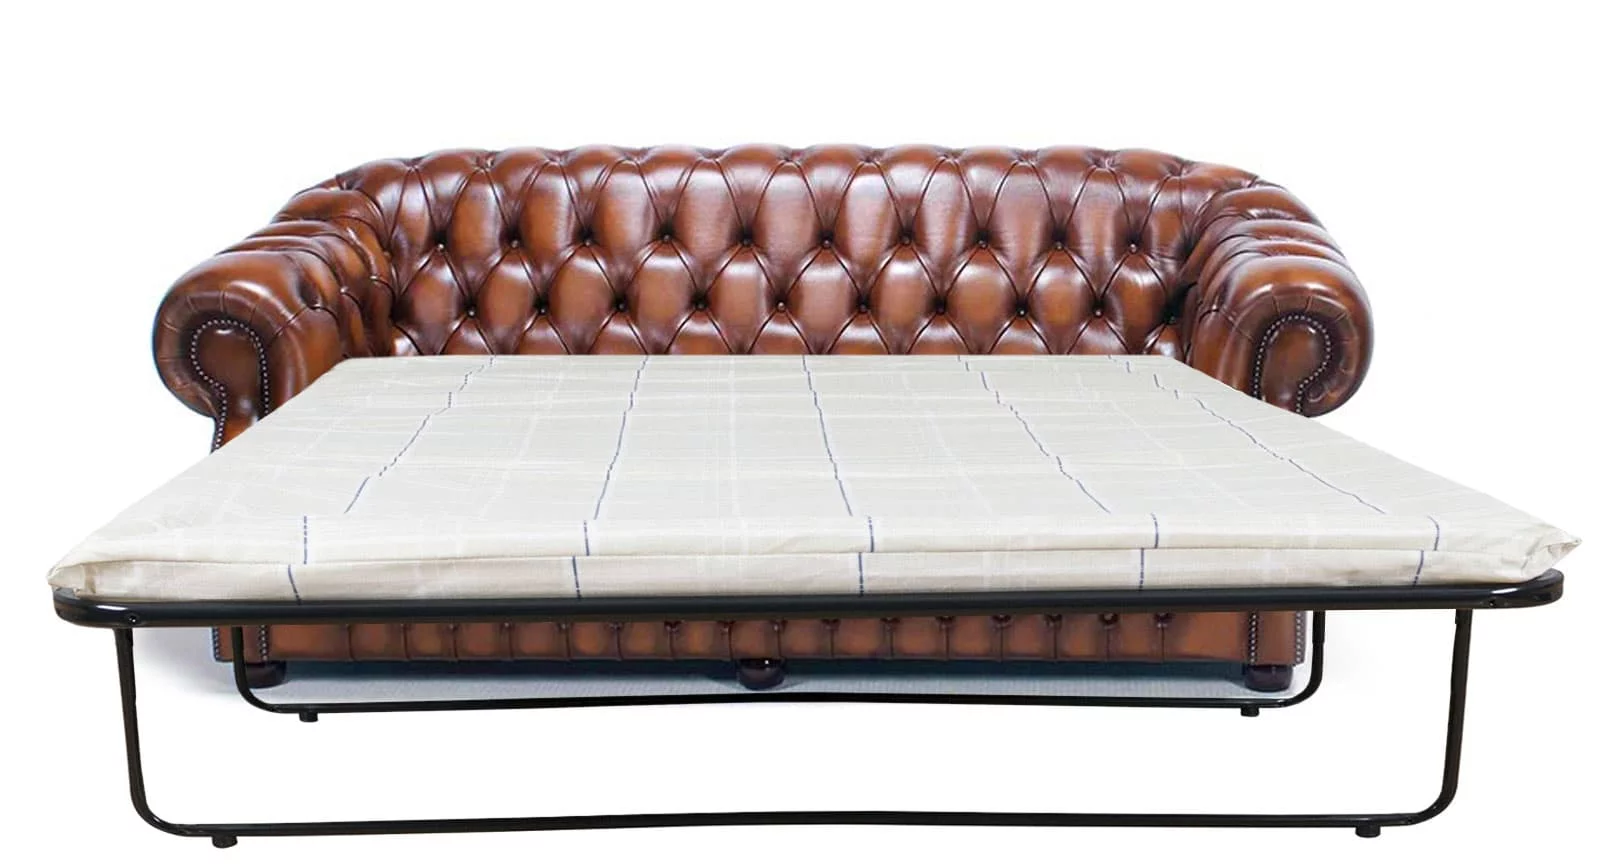 Windsor Chesterfield Sofa Beds